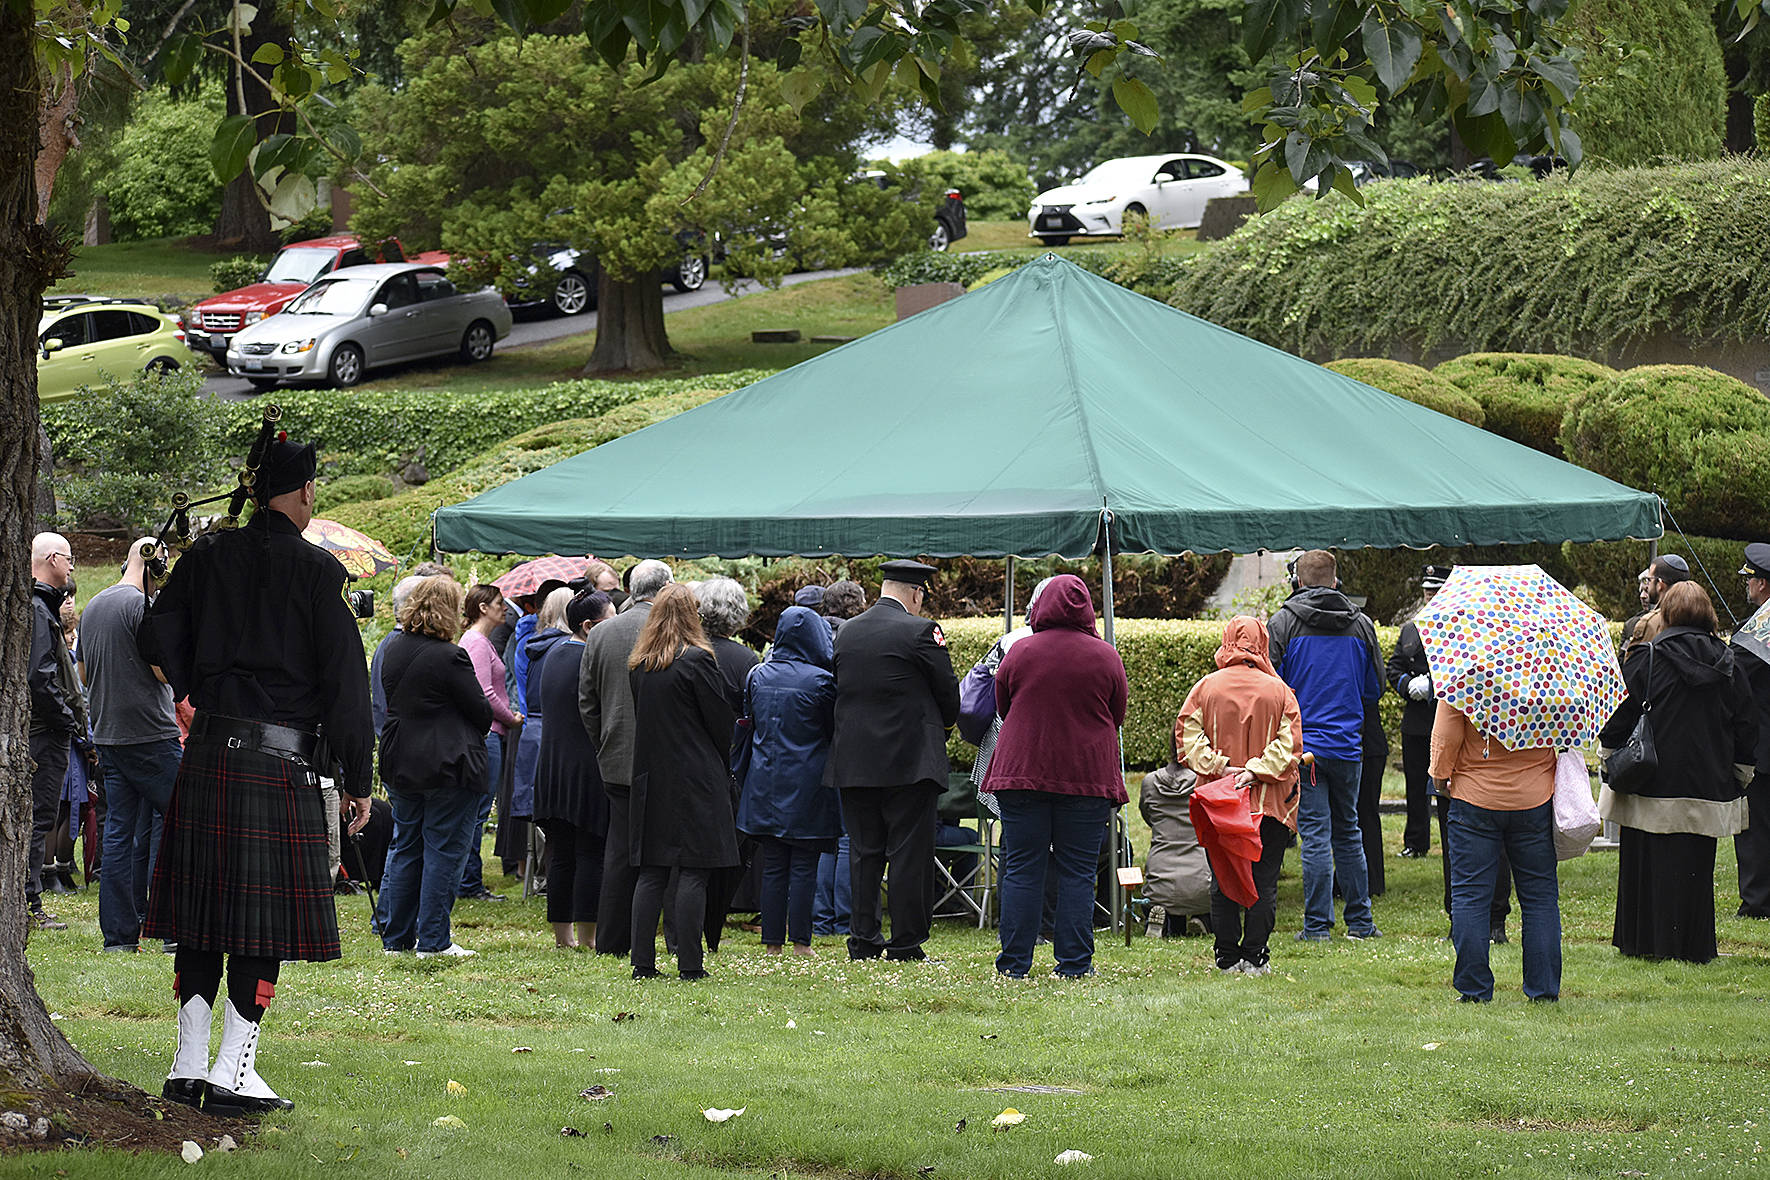 Photo by Haley Ausbun. Hundreds of people who passed away without family to bury them were remembered Wednesday, July 10, at the King County Medical Examiner’s Office Indigent Remains Ceremony at Mount Olivet Cemetery.